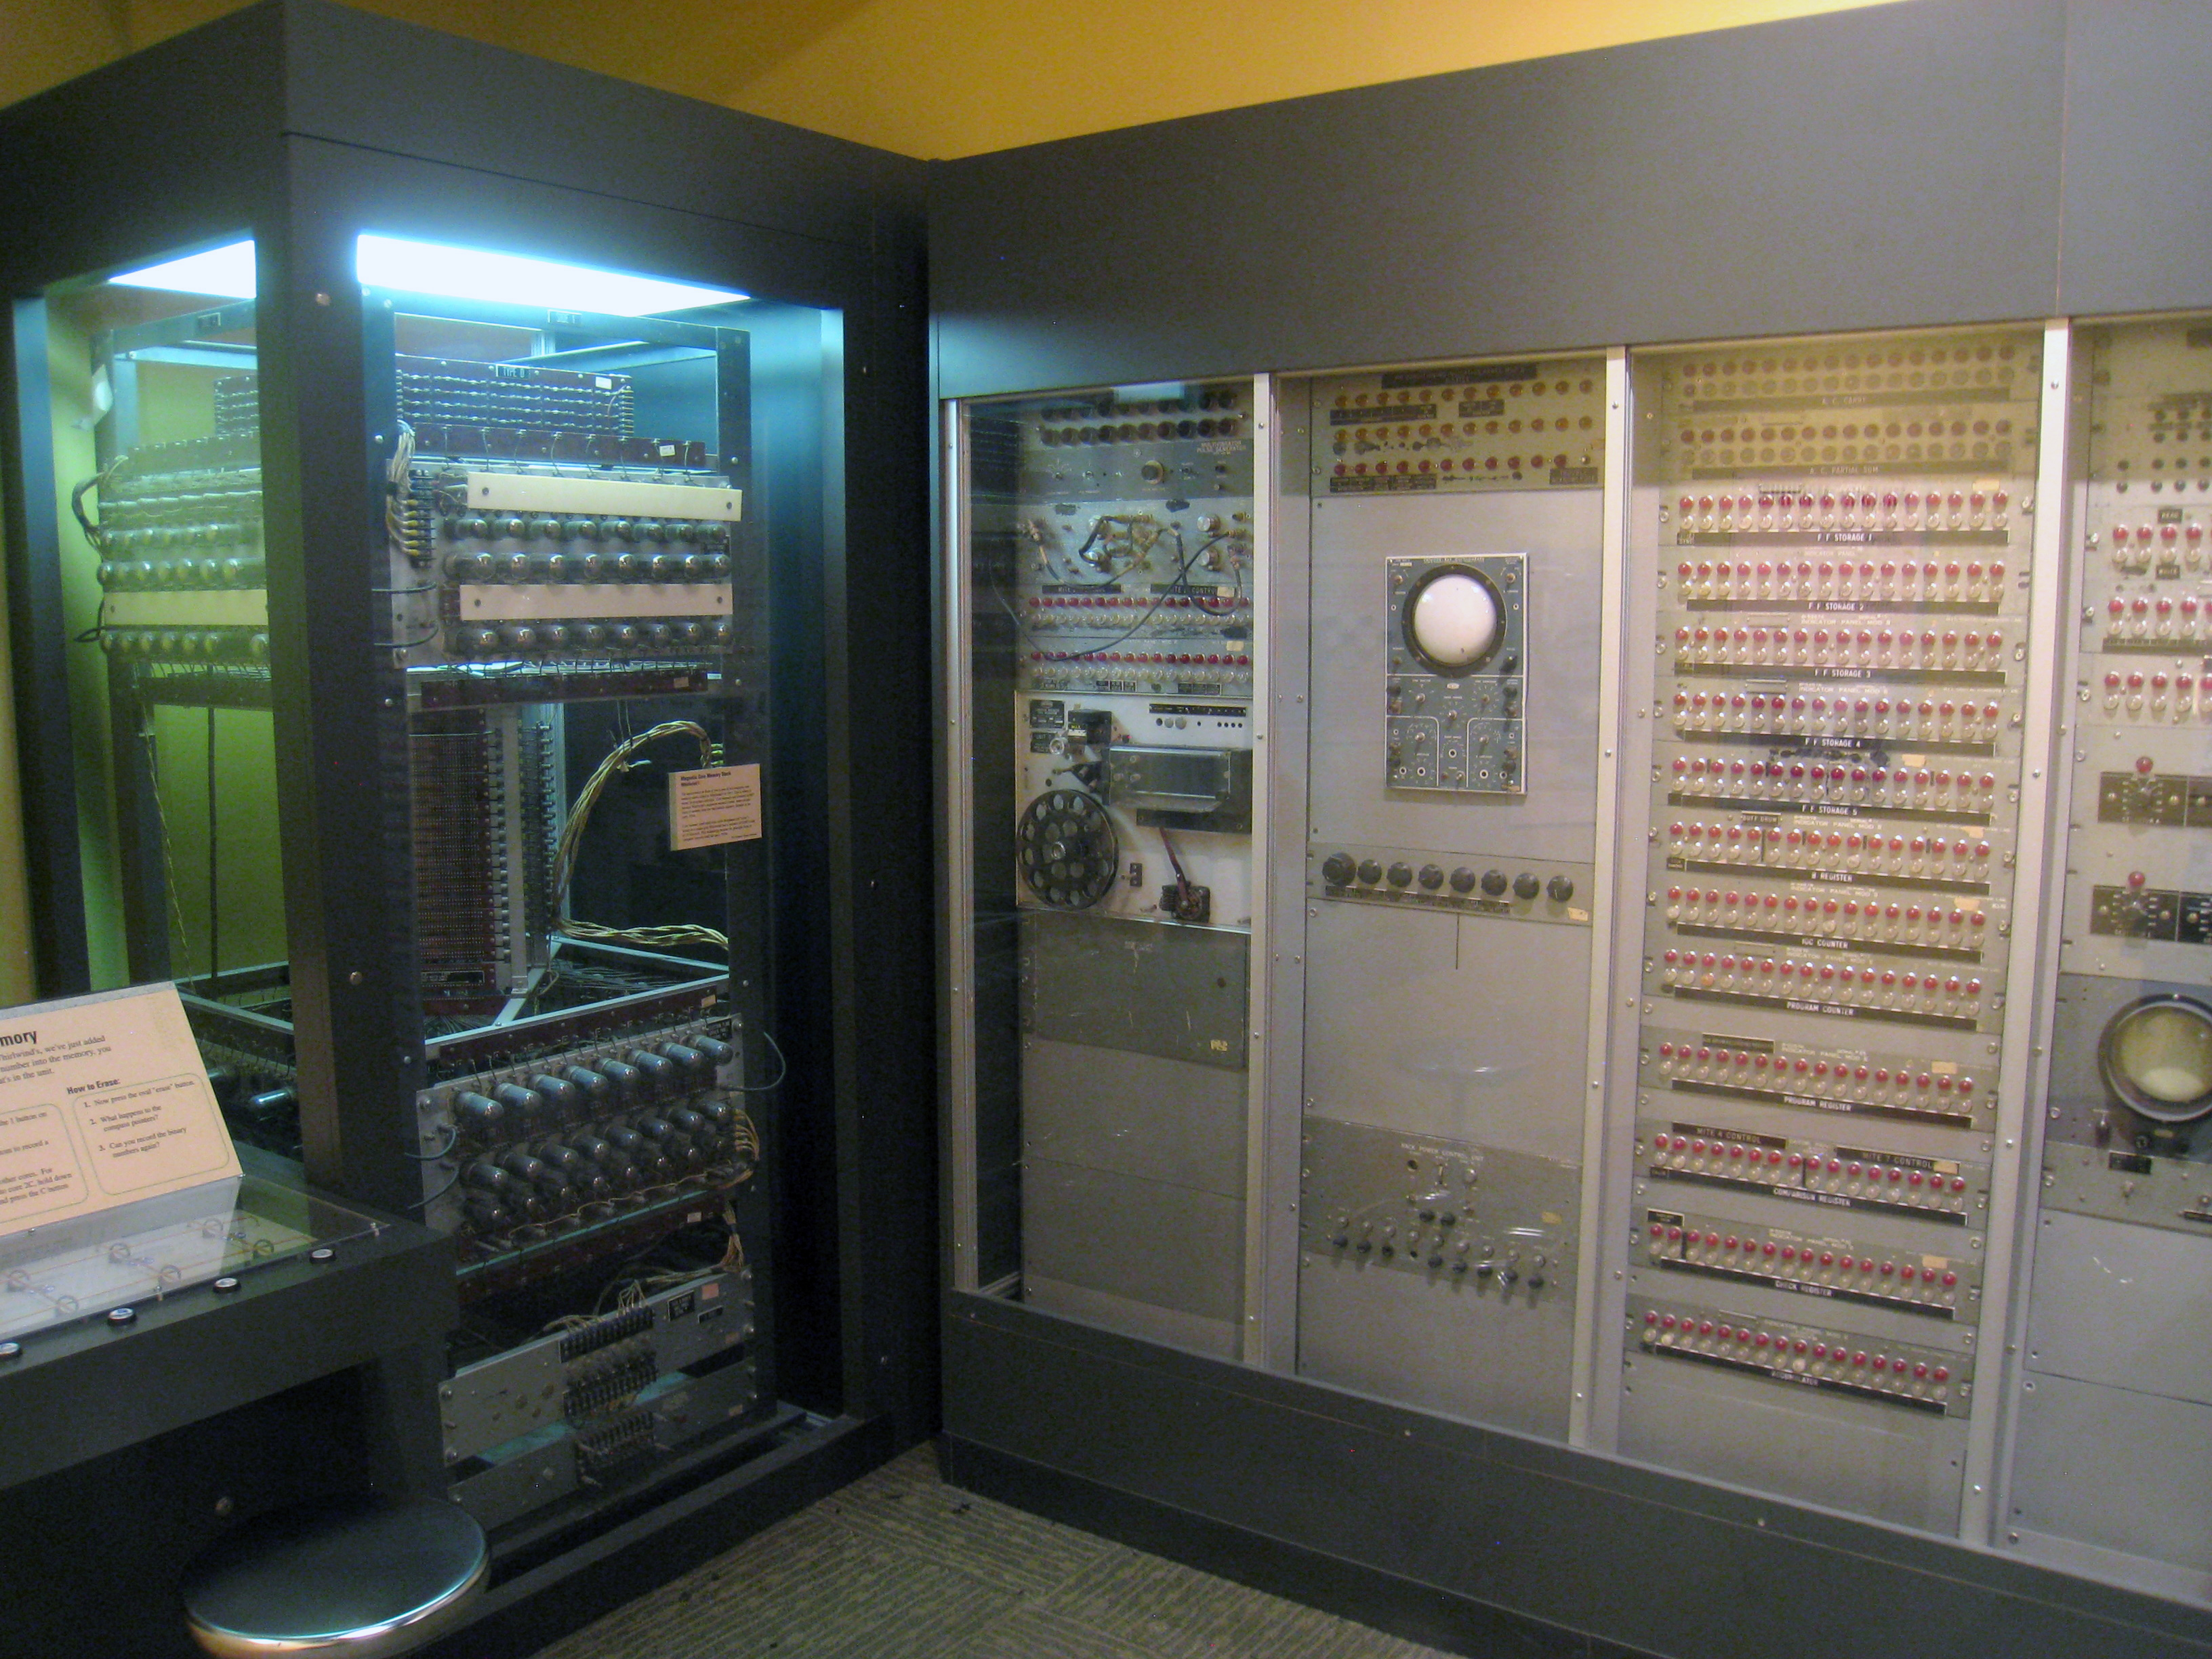 Whirlwind computer, sections of core memory and controls, in Museum of Science, Boston, Massachusetts, USA.